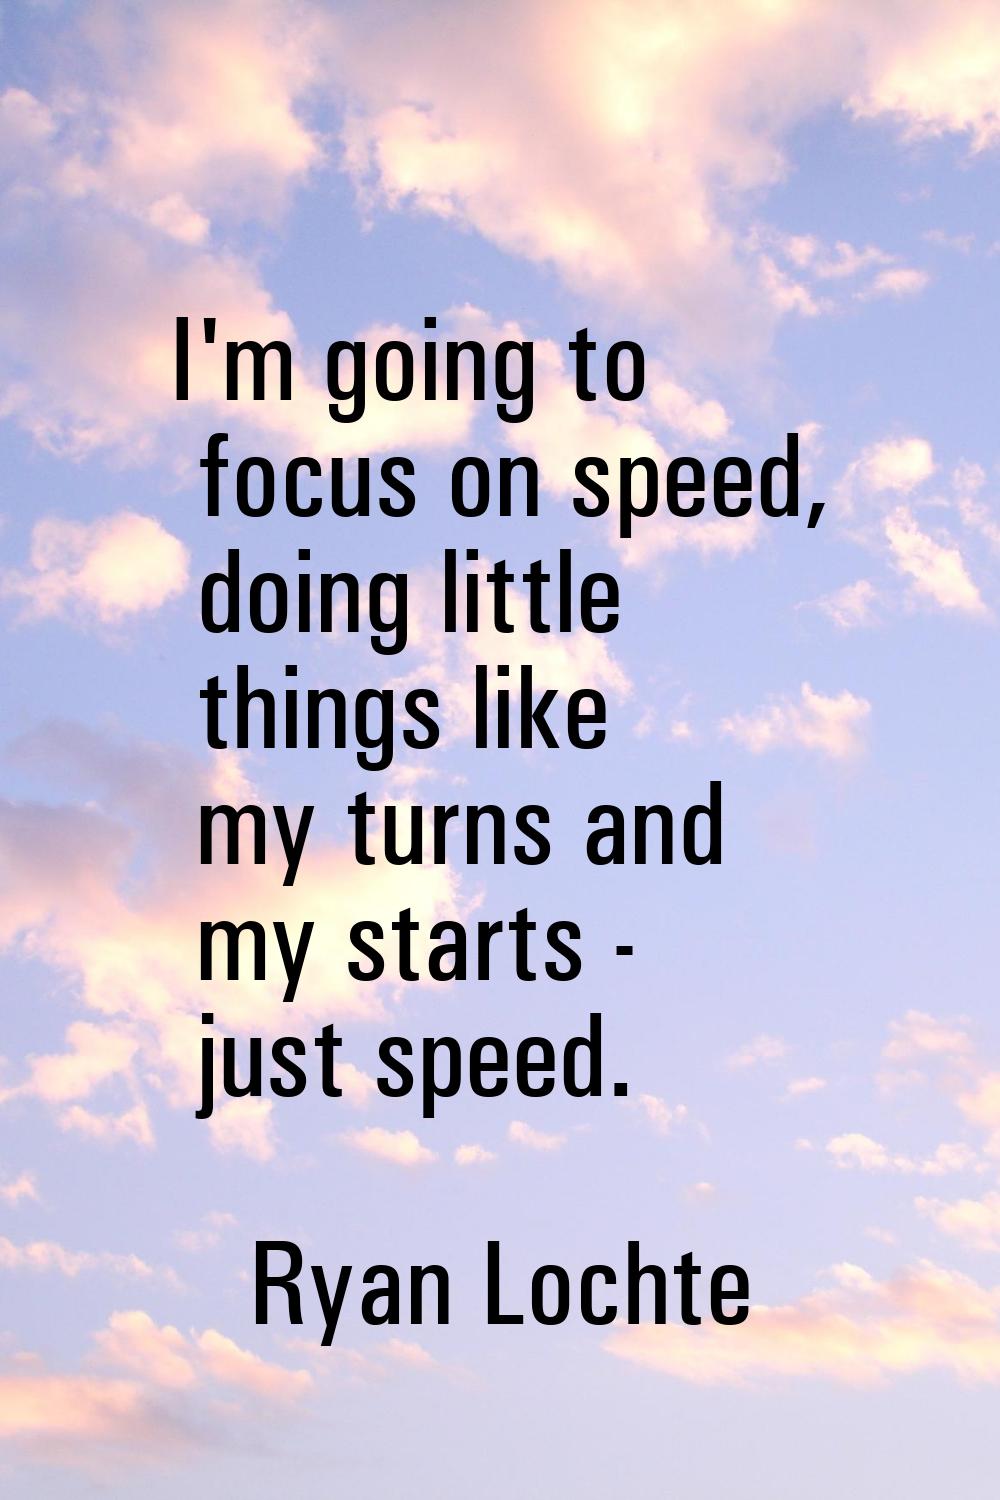 I'm going to focus on speed, doing little things like my turns and my starts - just speed.